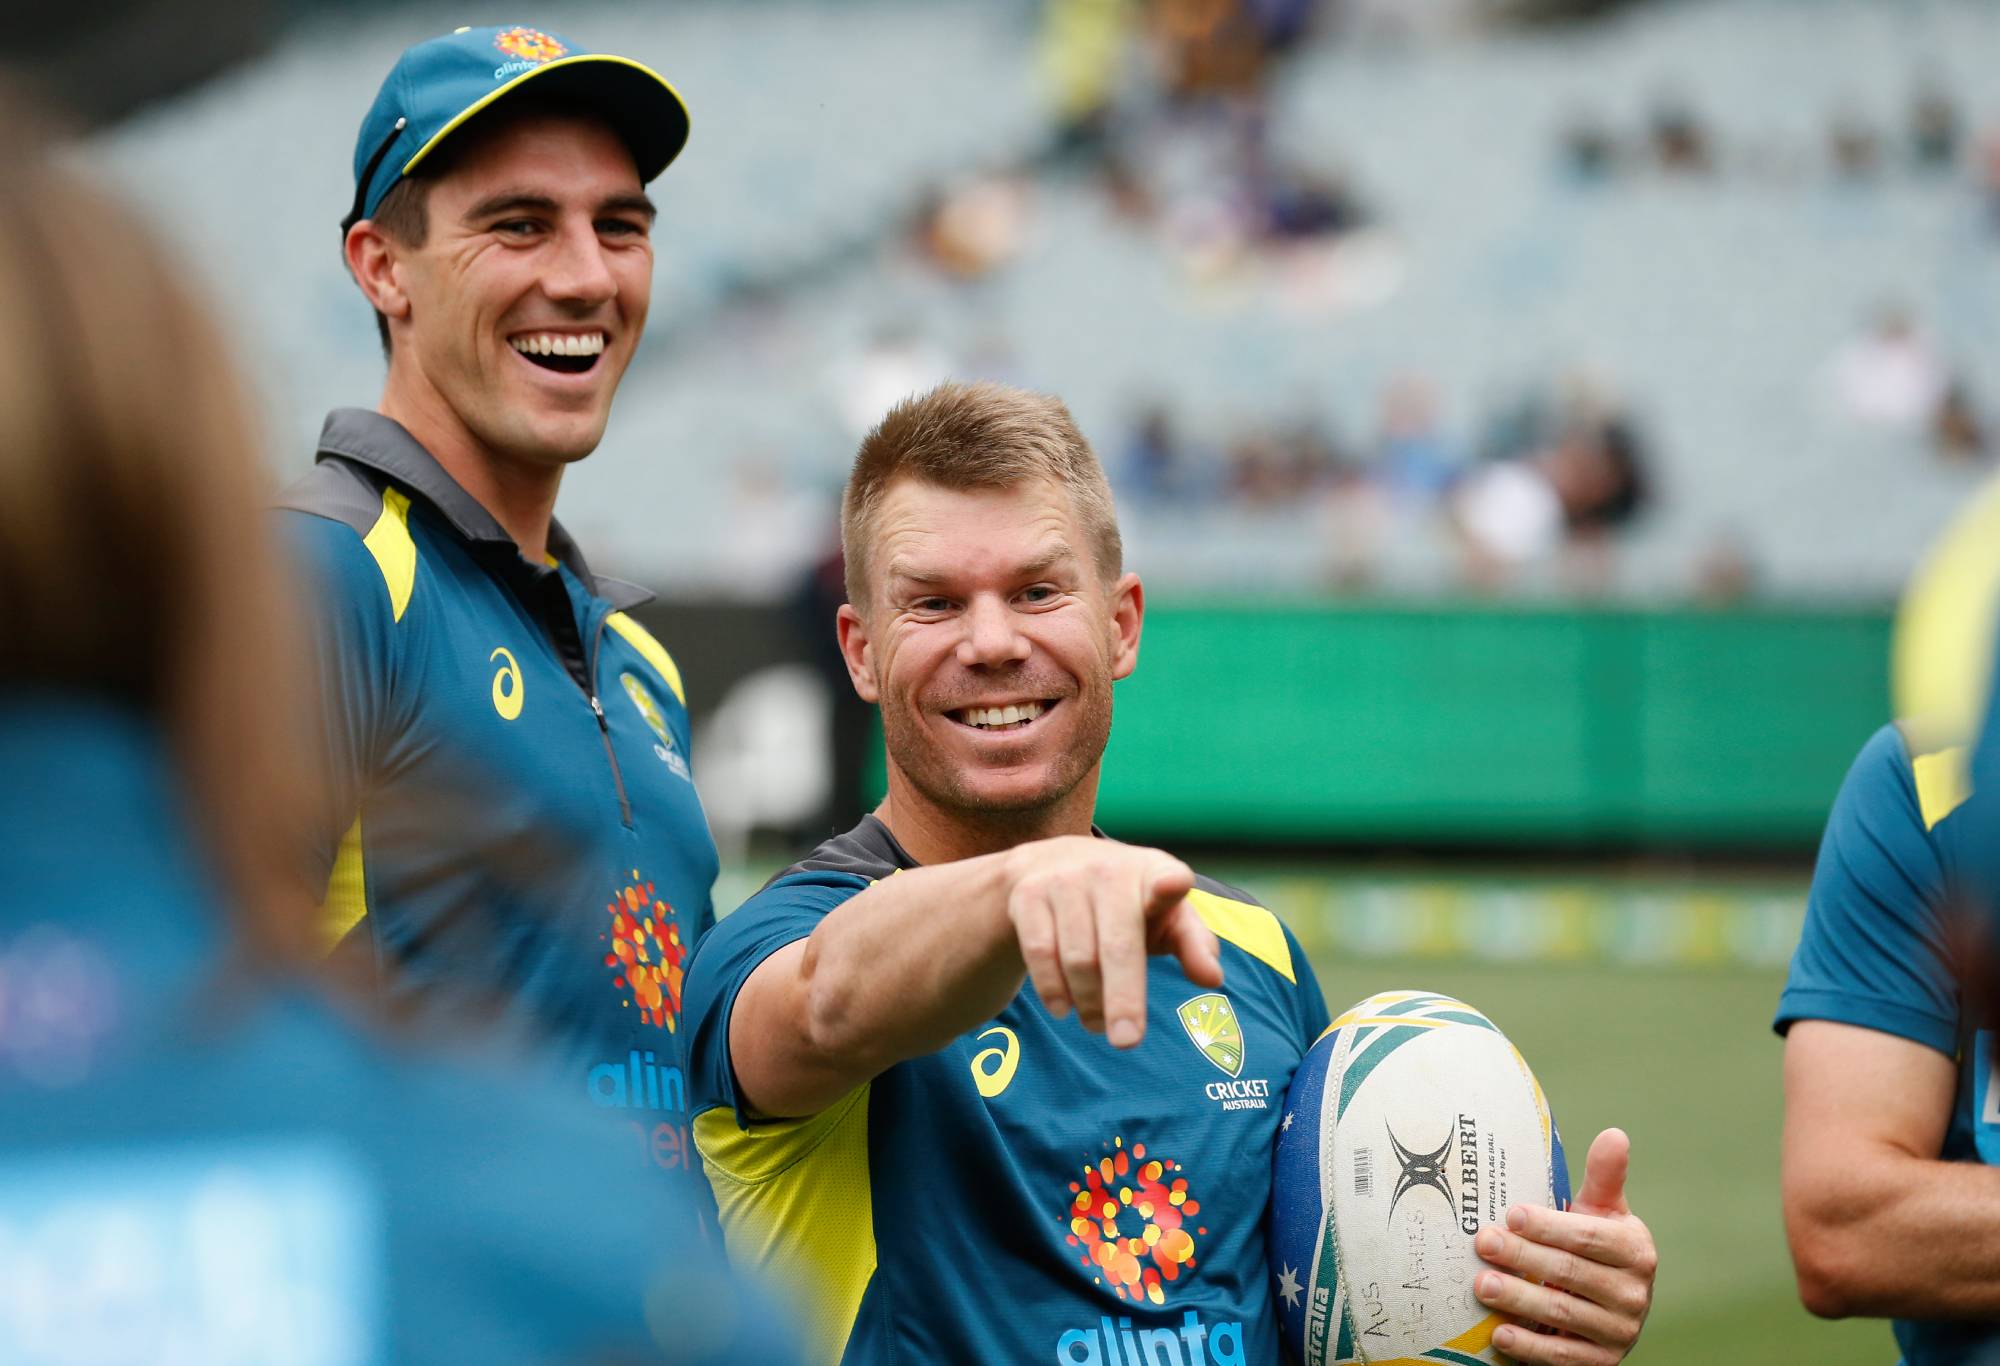 MELBOURNE, AUSTRALIA - NOVEMBER 01: Pat Cummins and David Warner of Australia laugh during the warm up before game three of the Men's International Twenty20 match between Australia and Sri Lanka at Melbourne Cricket Ground on November 01, 2019 in Melbourne, Australia. (Photo by Darrian Traynor/Getty Images)